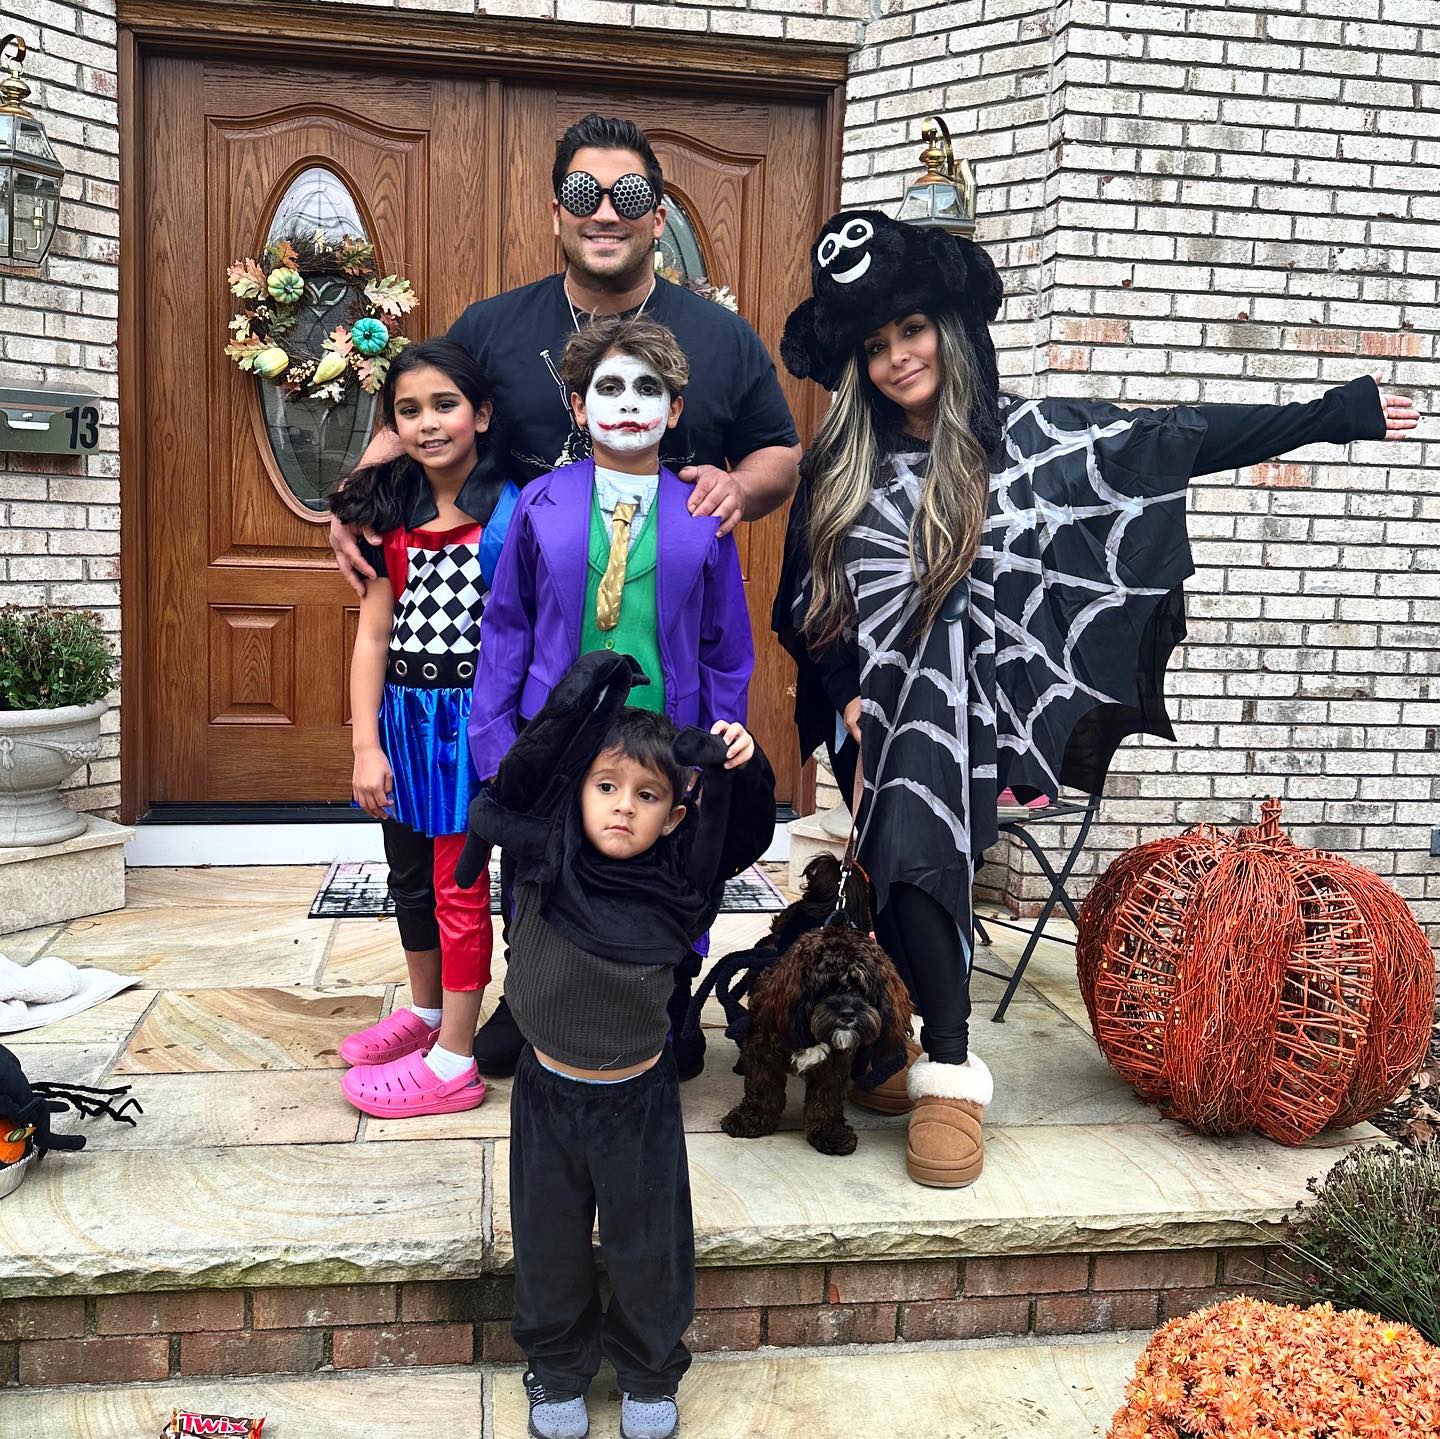 Snooki and her husband Jionni Lavalle are parents to Lorenzo Dominic, Angelo James and Giovanna Marie